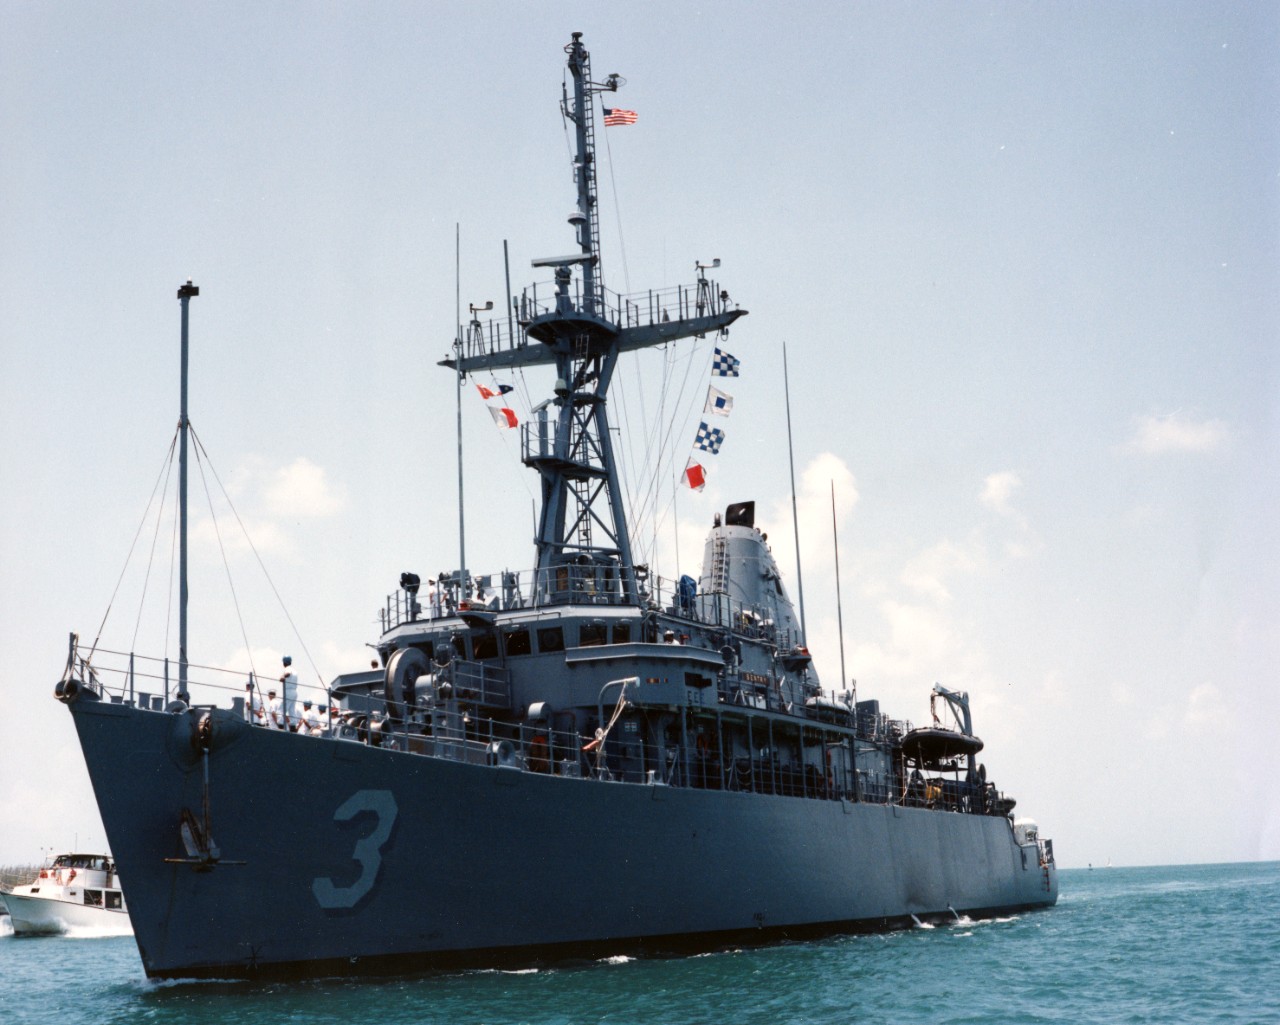 Port bow view of mine countermeasures ship USS Sentry (MCM-3) as it enters harbor at Key West, Florida